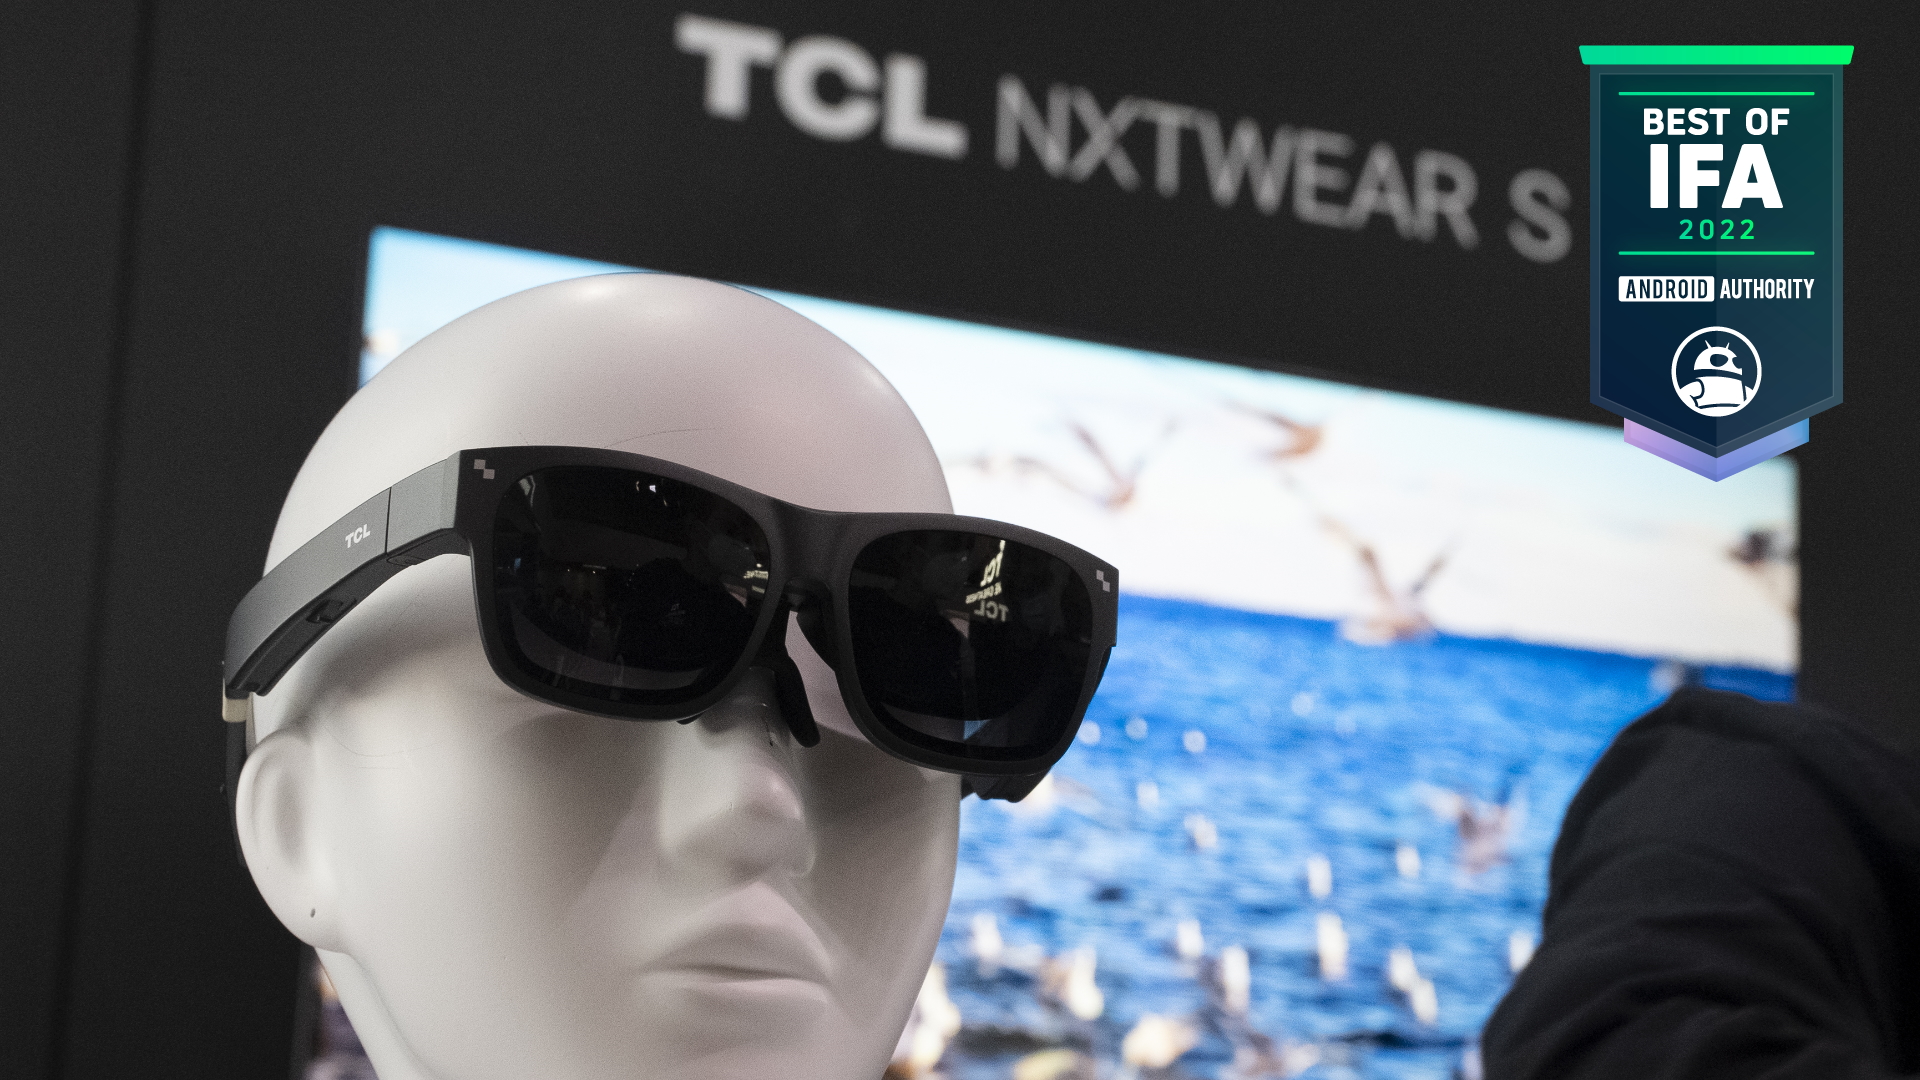 TCL NxtWear S Best of IFA badged